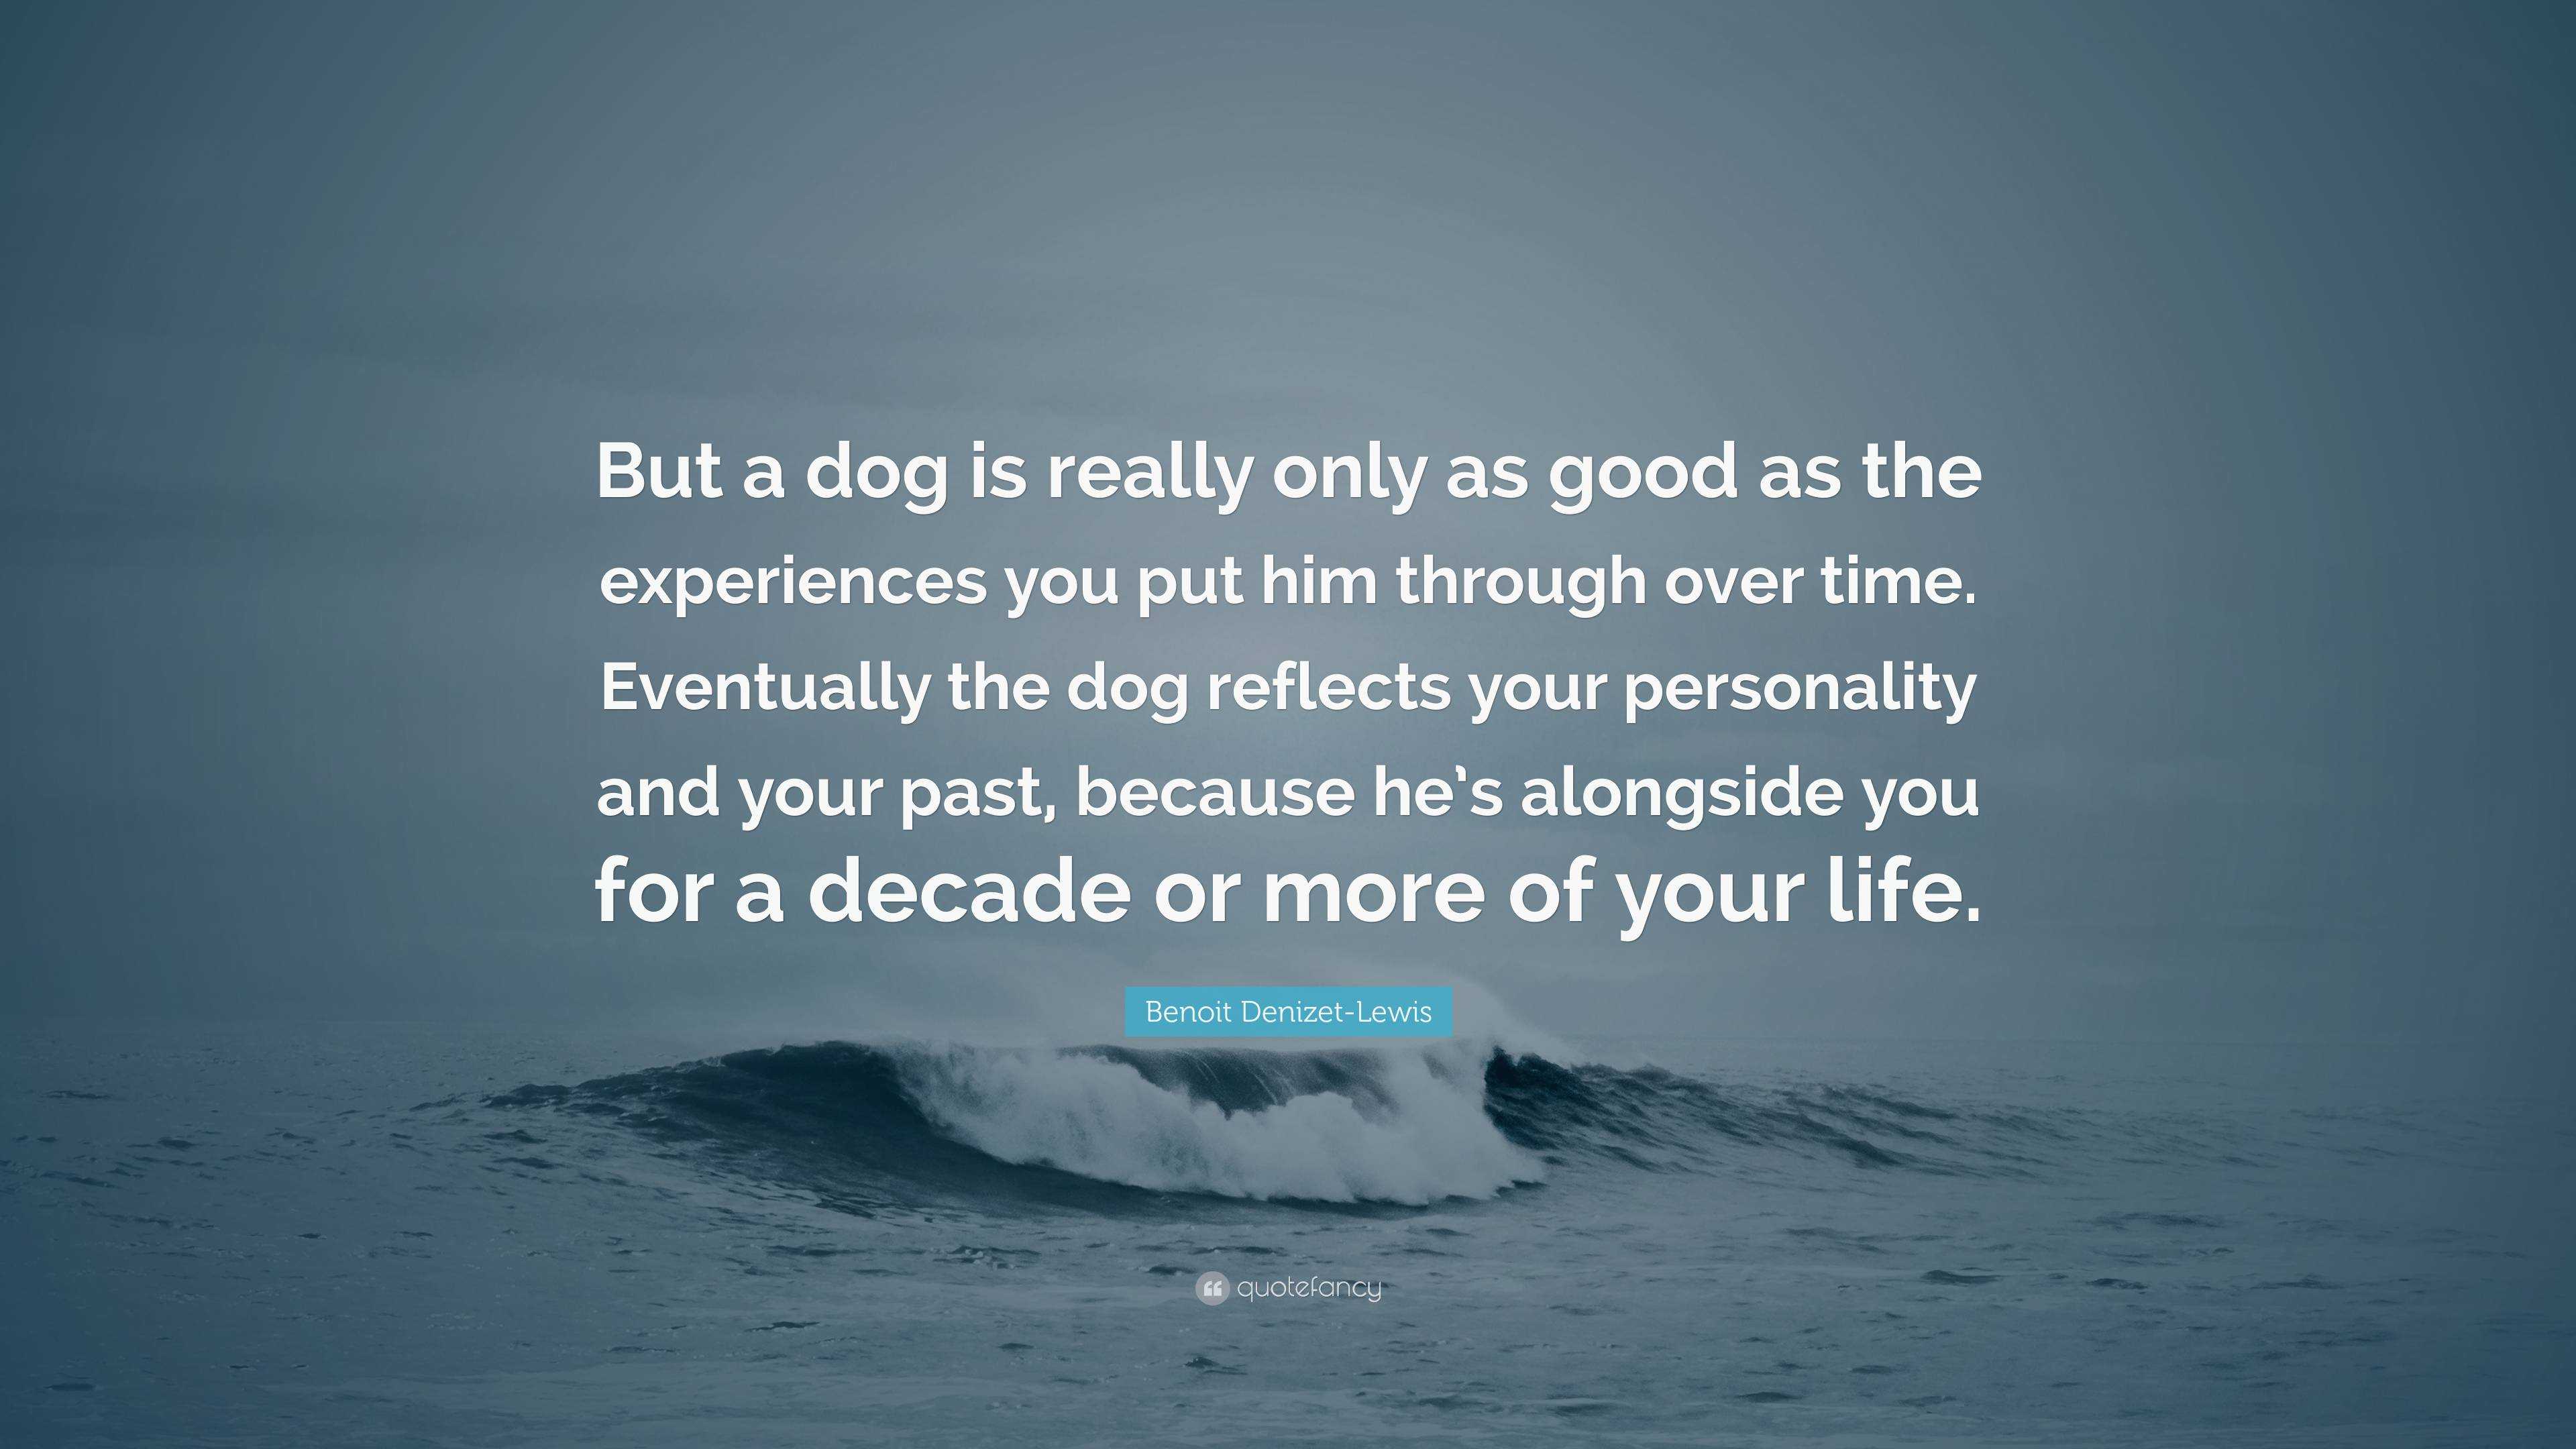 does your dog reflect your personality